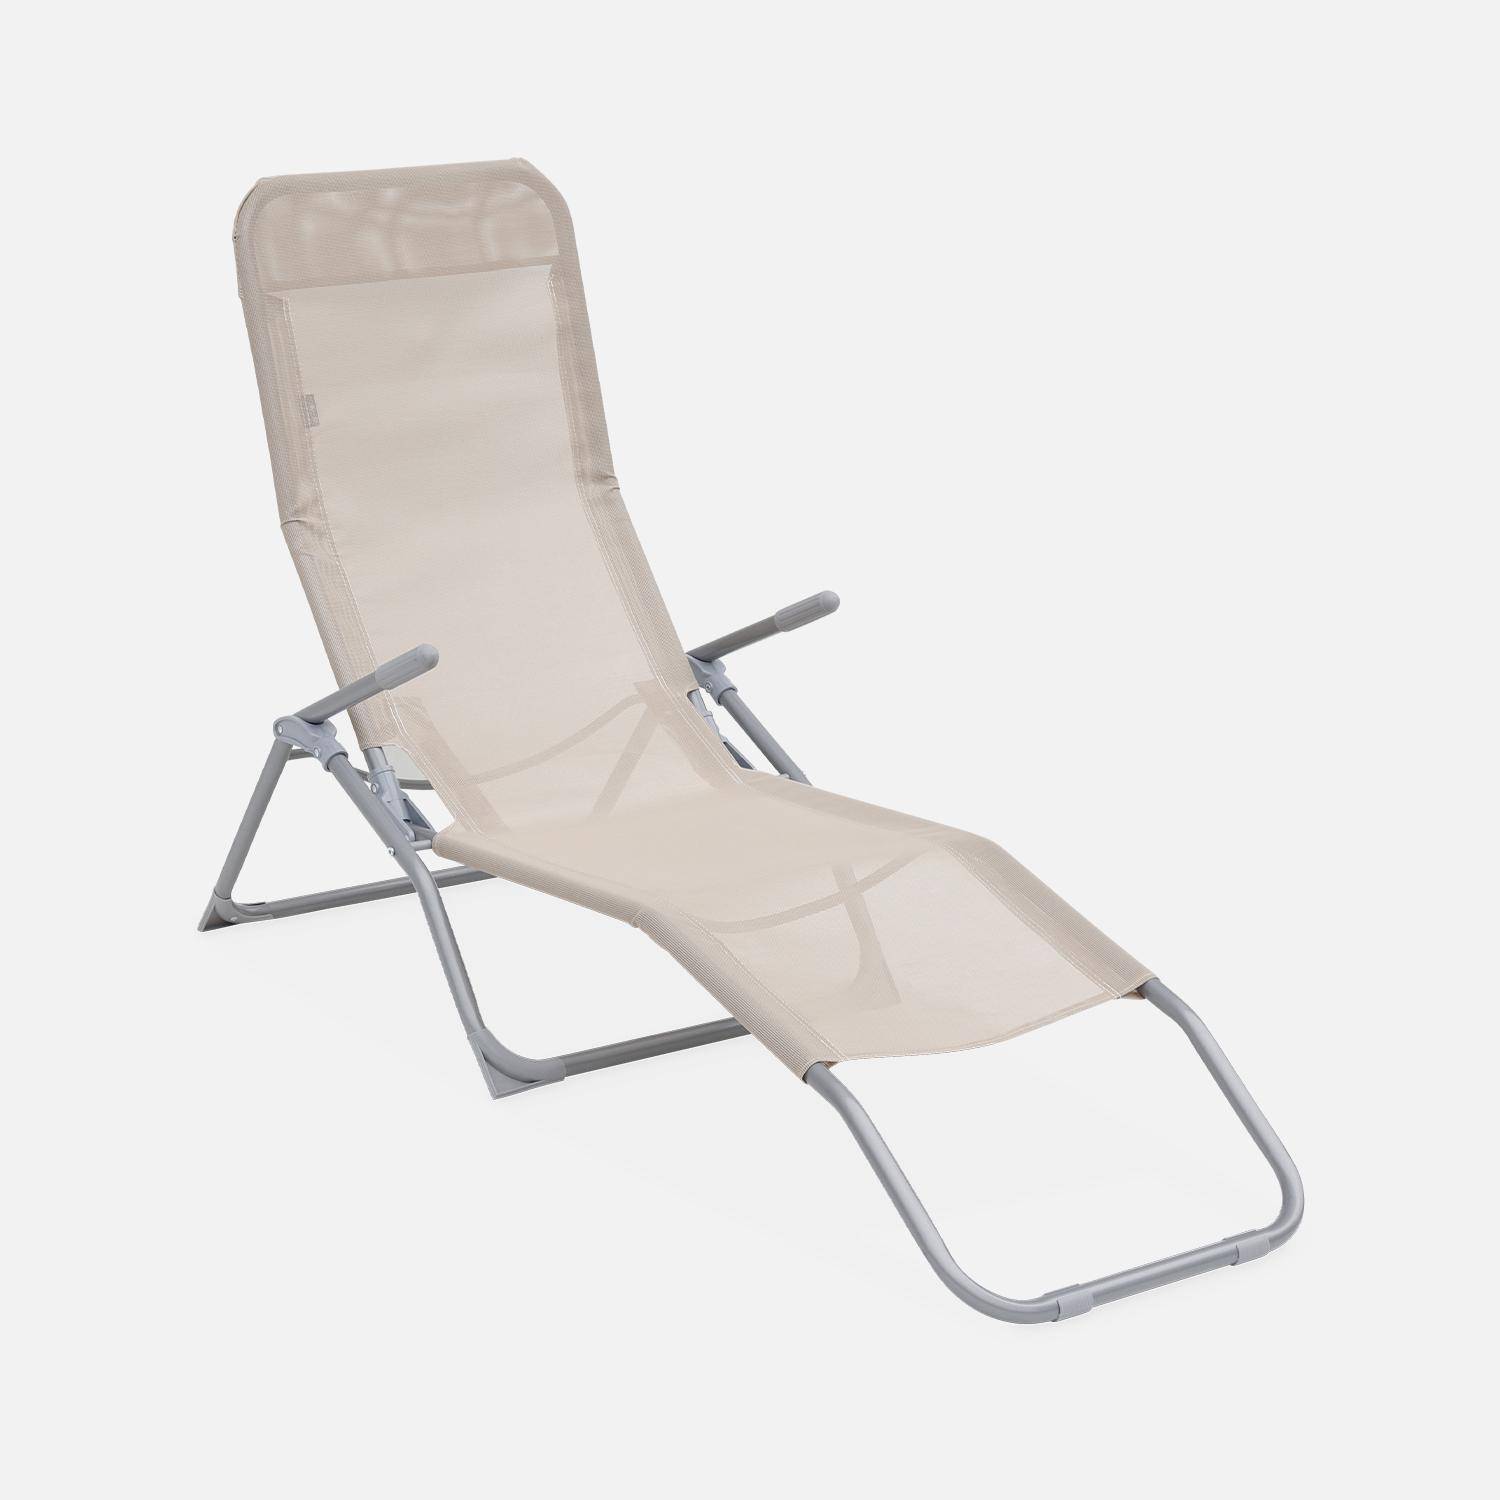 Set of 2 textilene sun loungers - 2 positions - Levito - Taupe,sweeek,Photo4